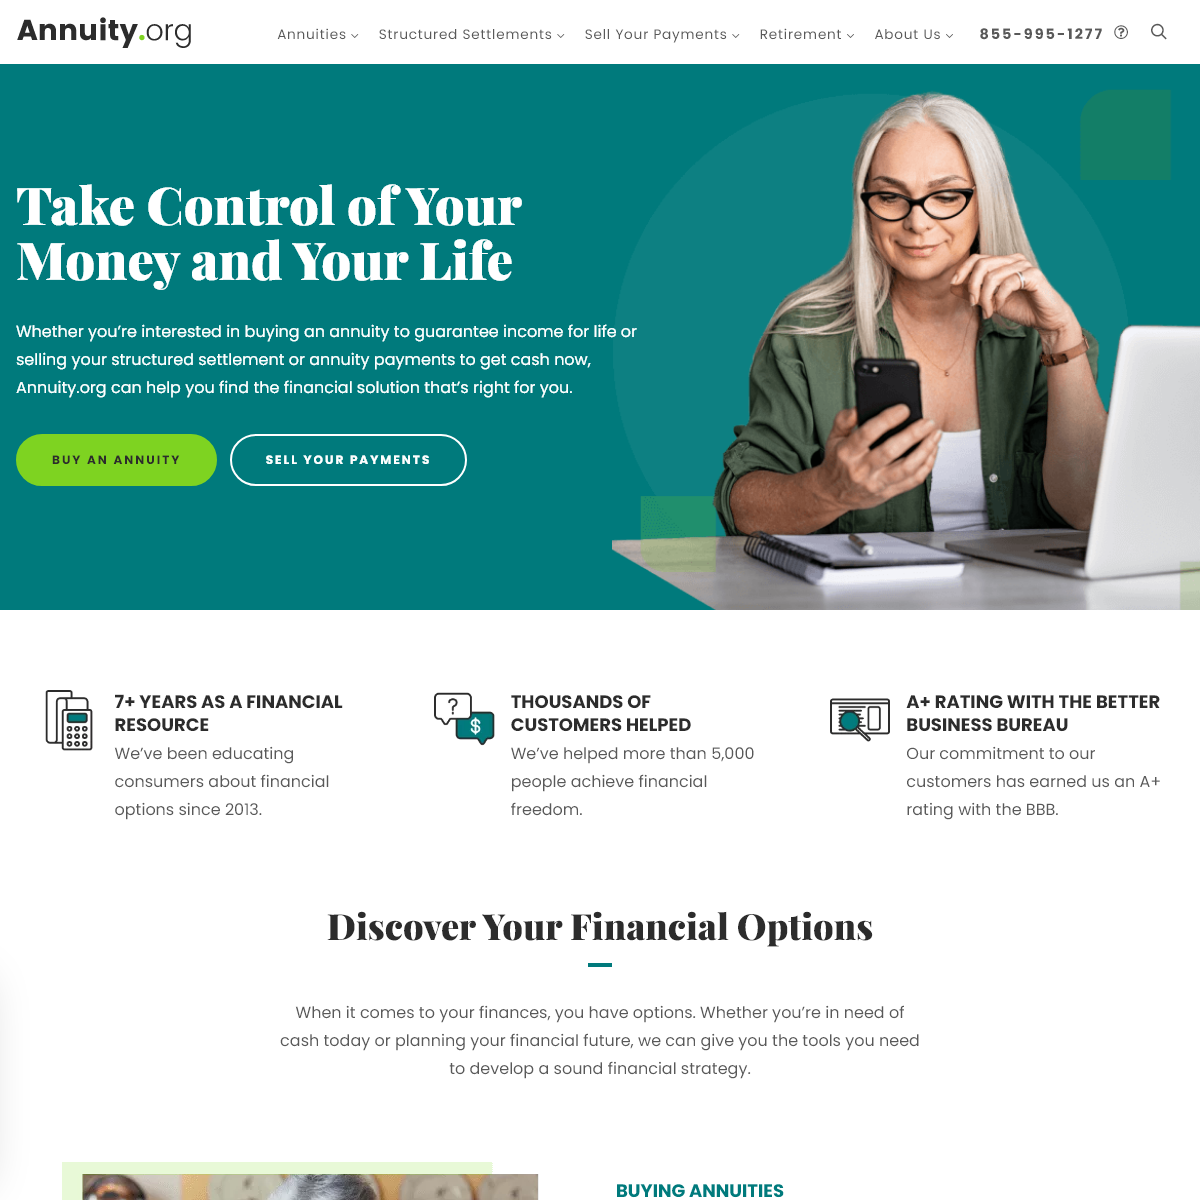 A complete backup of annuity.org